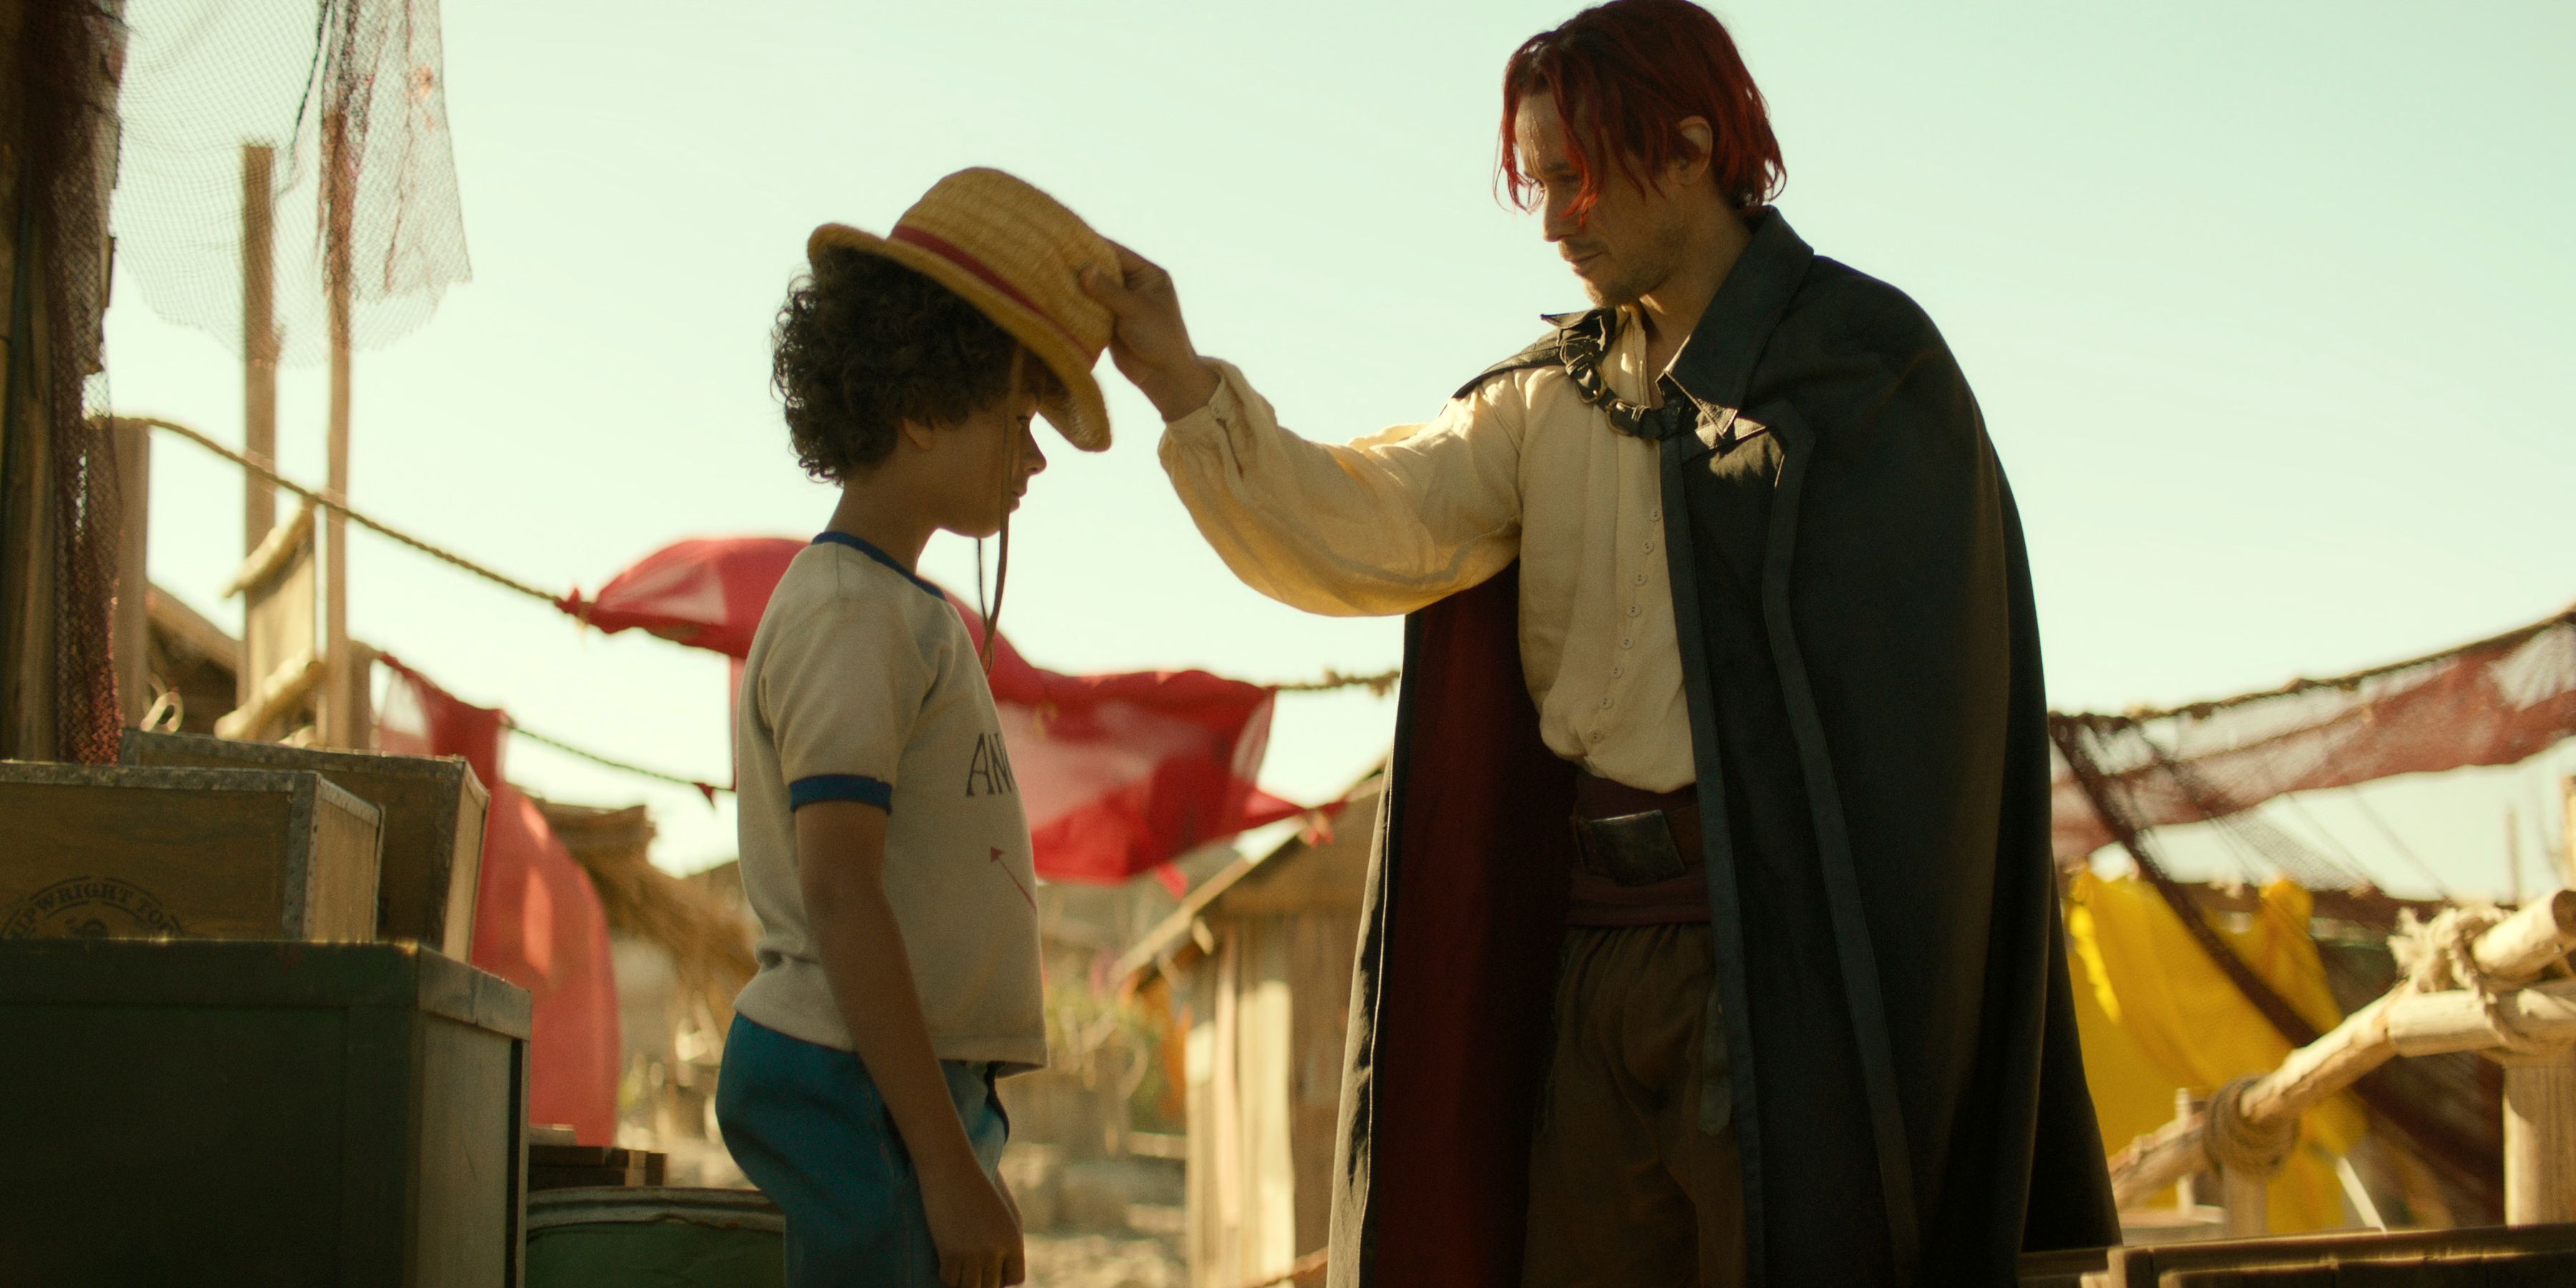 'One Piece' Live Action Series Gives Luffy's Village a New Look